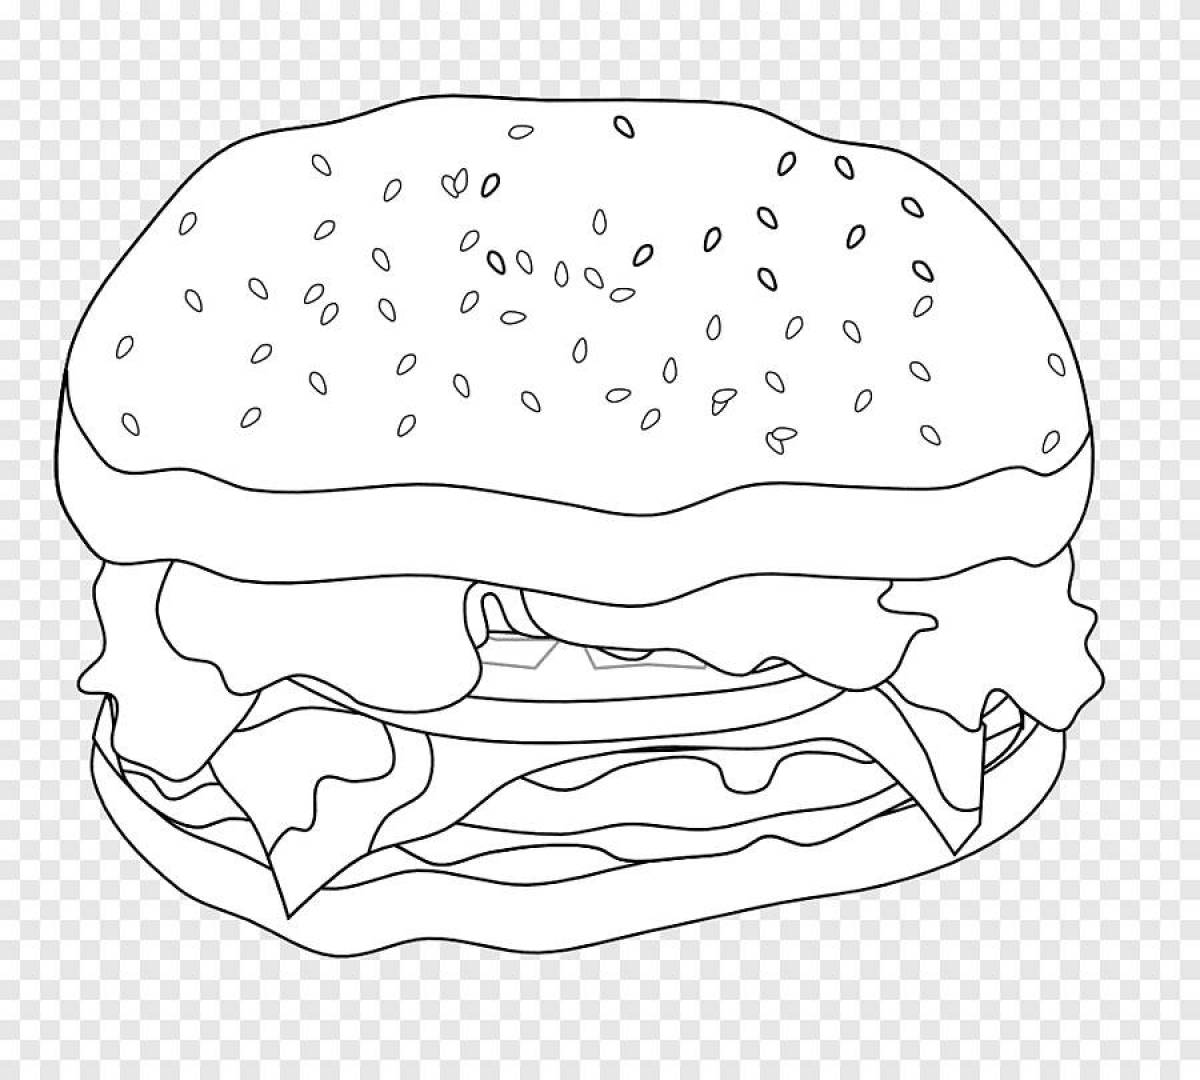 Great burger coloring page